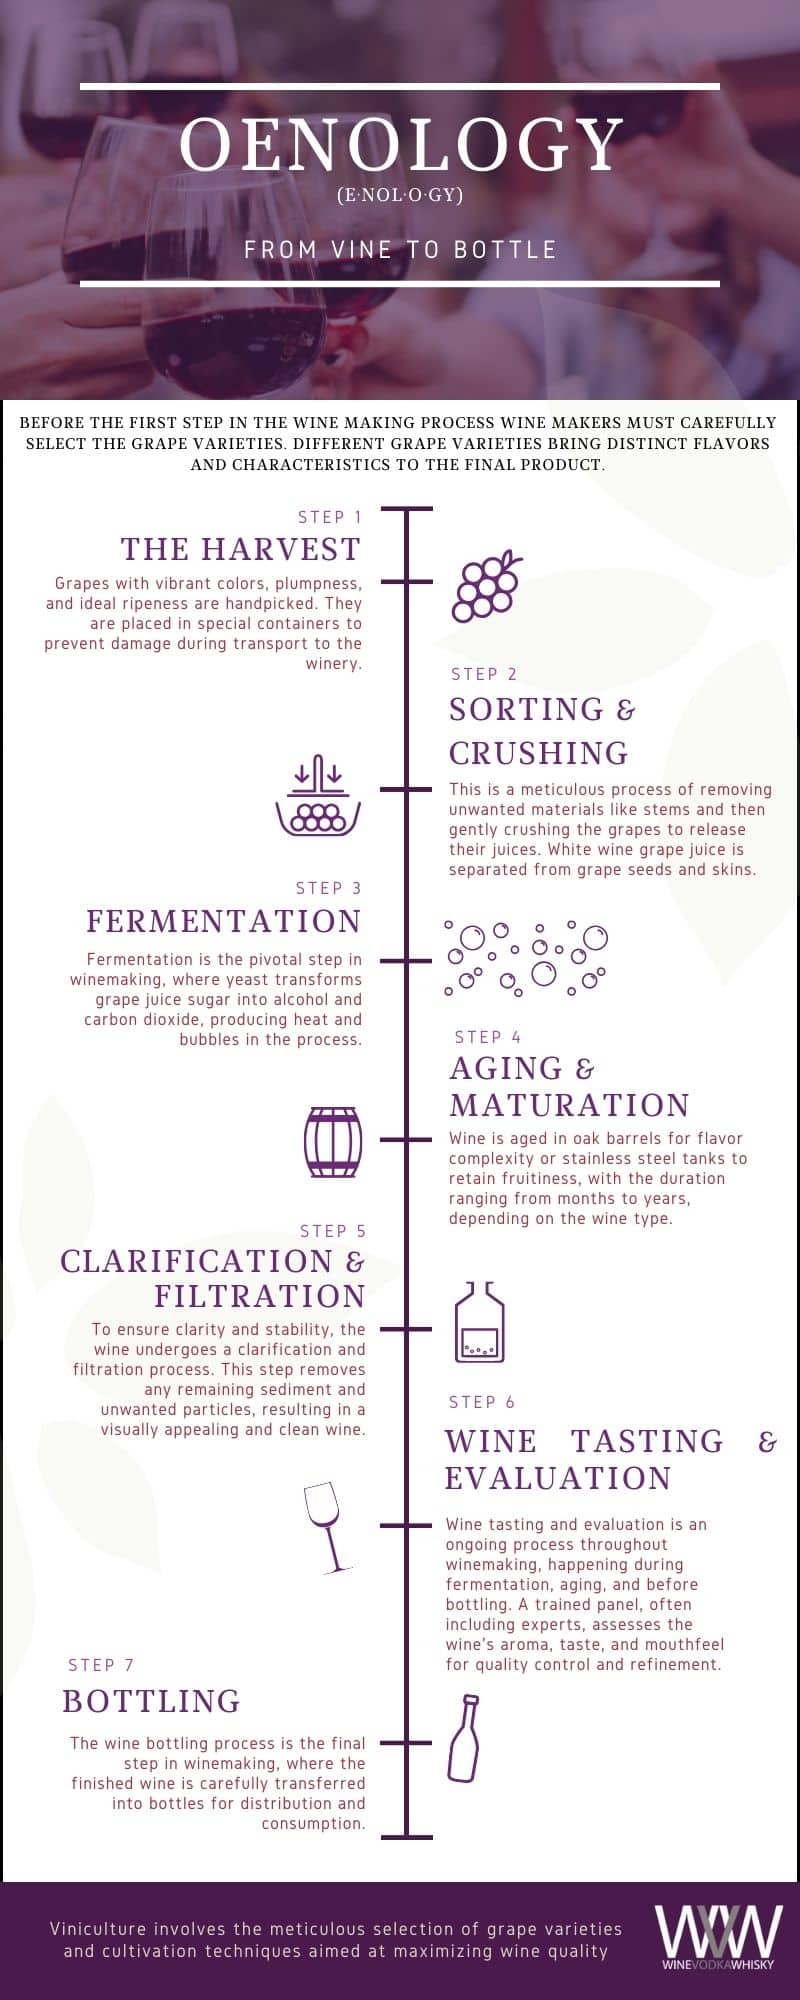 7 Steps of the Wine Making Process